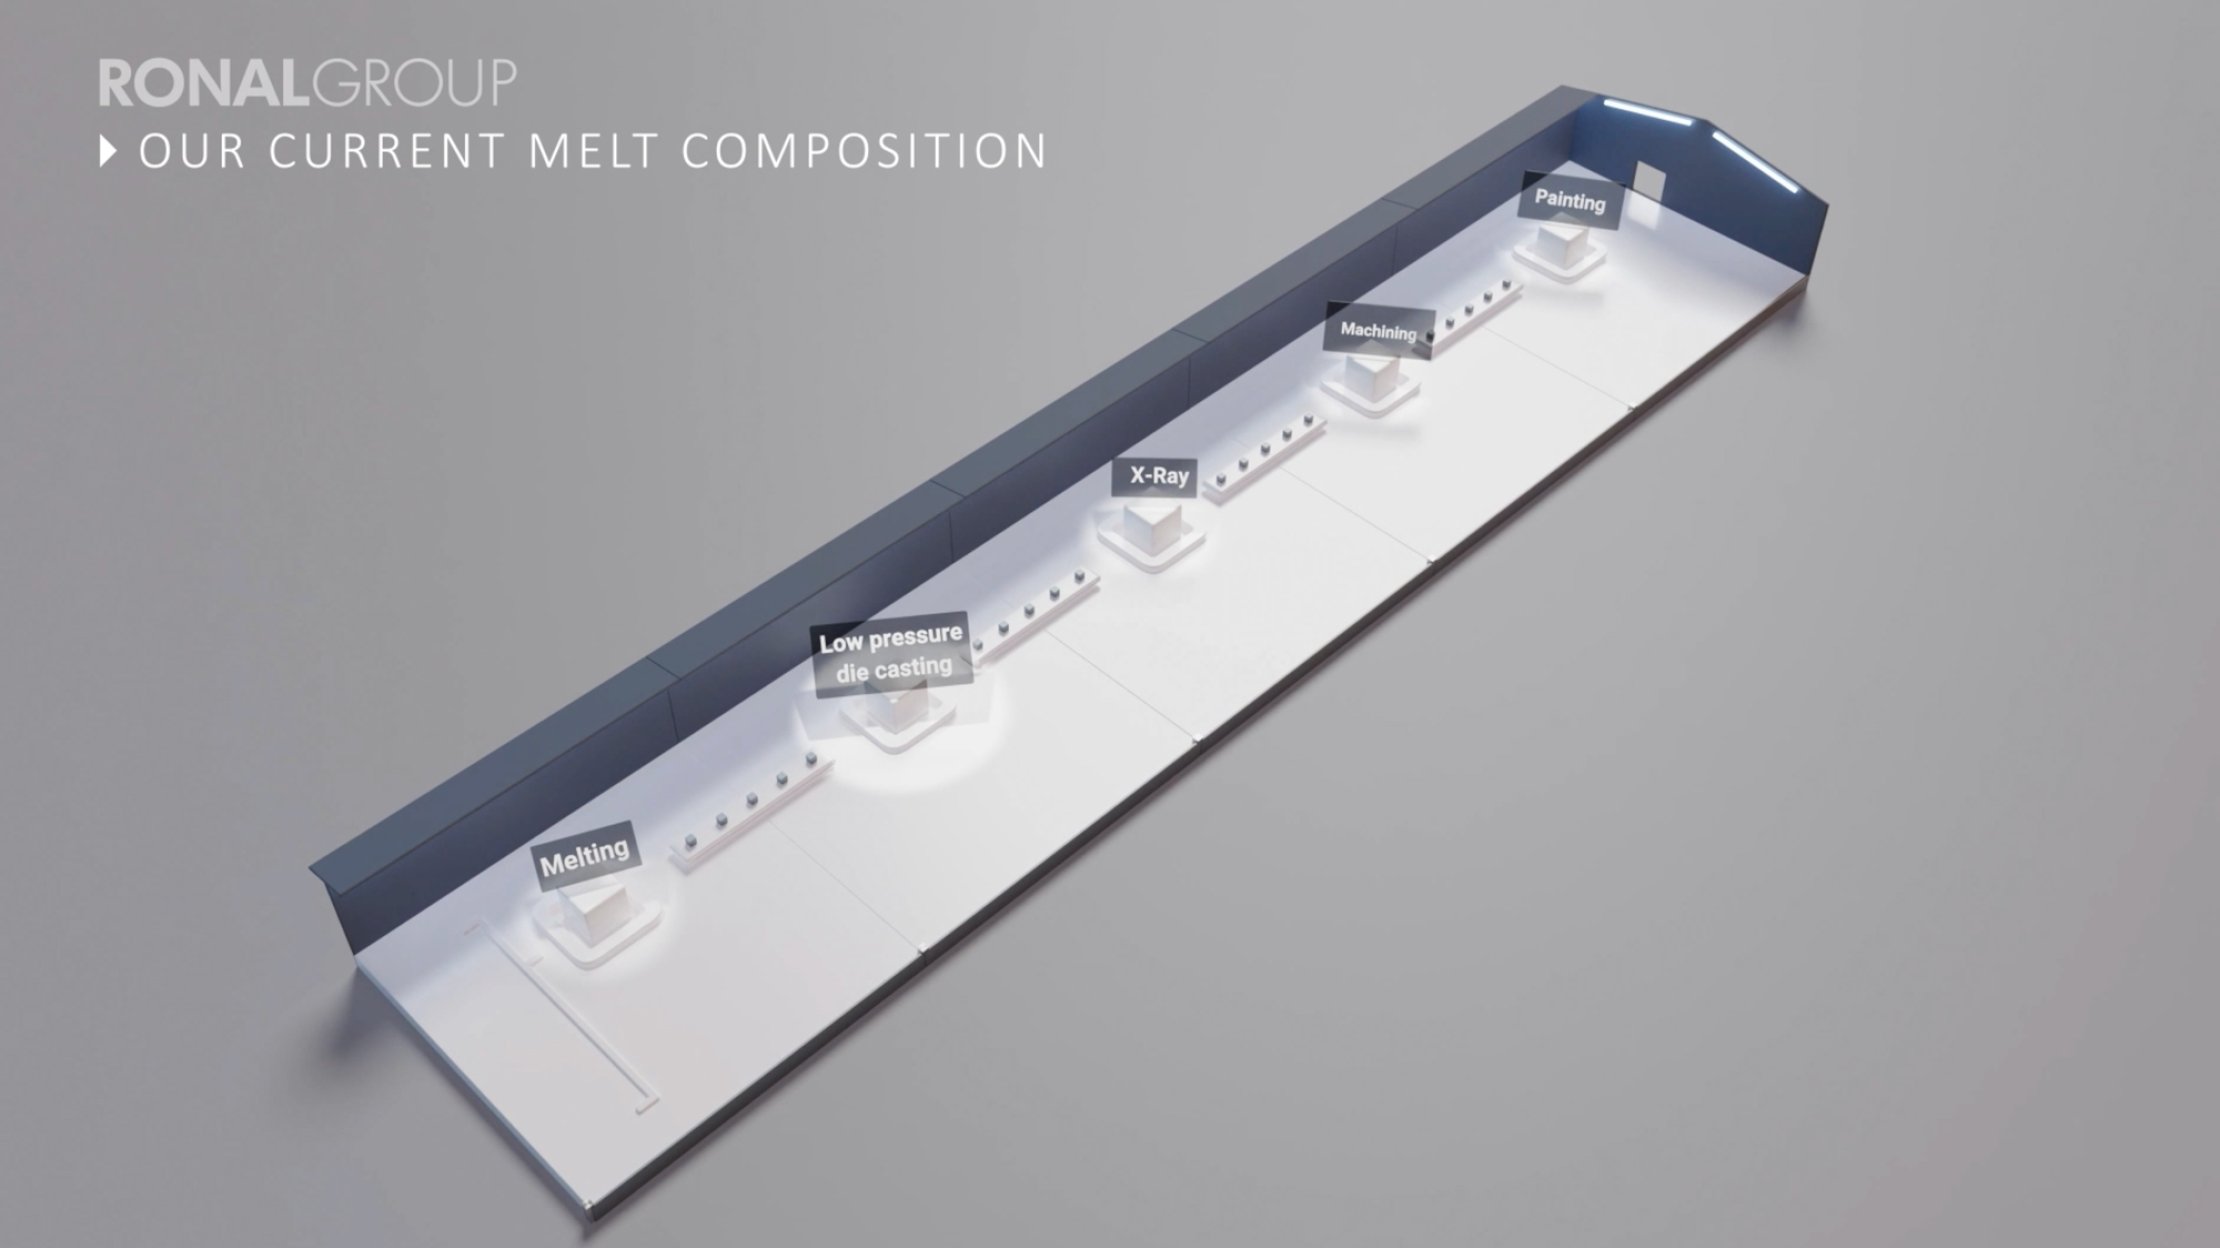 a graphic explanation of Melt Composition